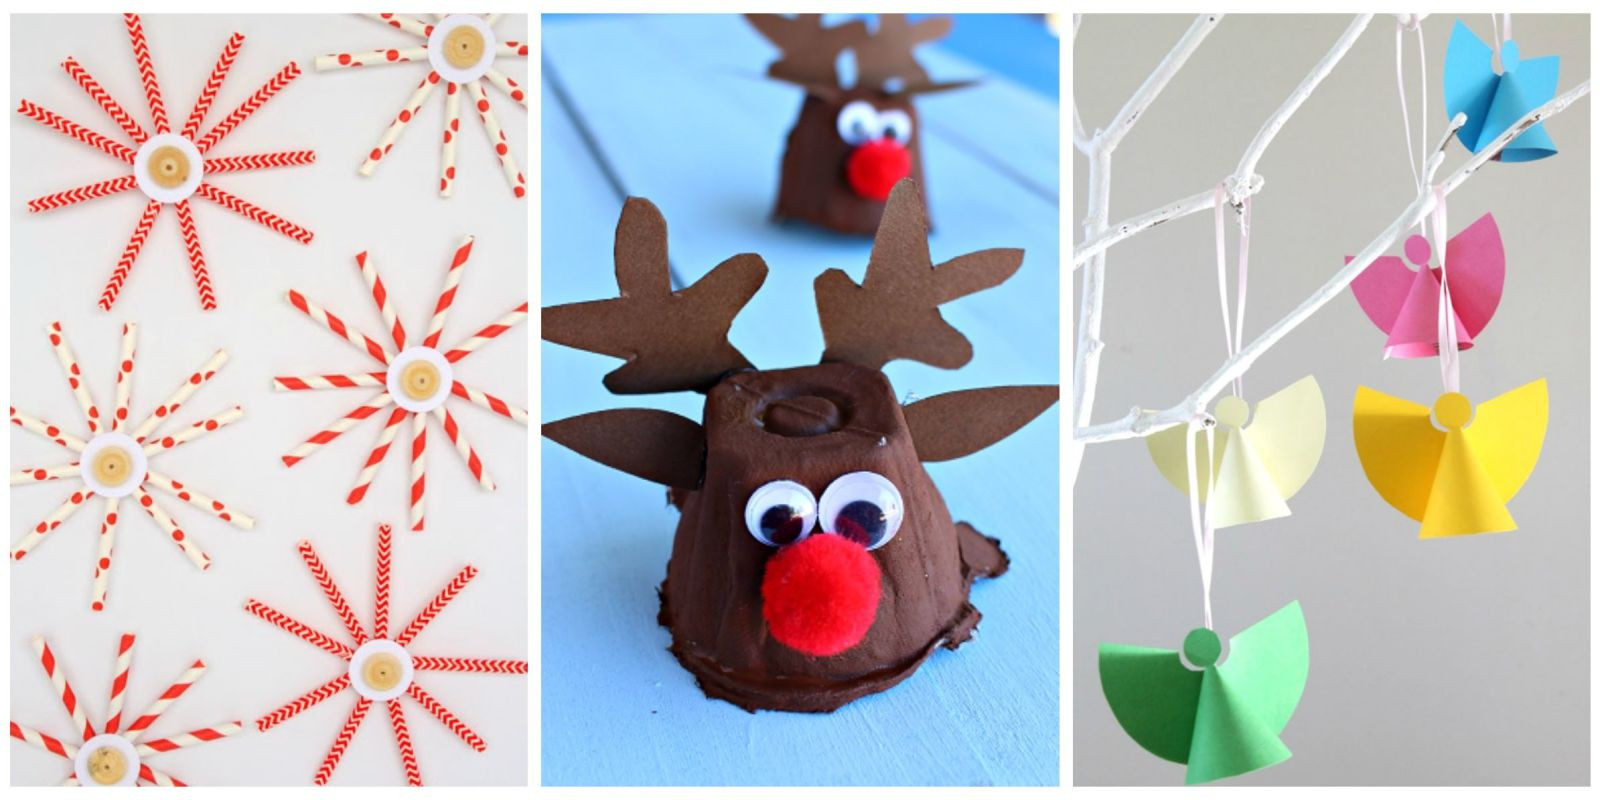 DIY Christmas Activities
 26 Christmas Activities for Kids DIY Holiday Crafts and